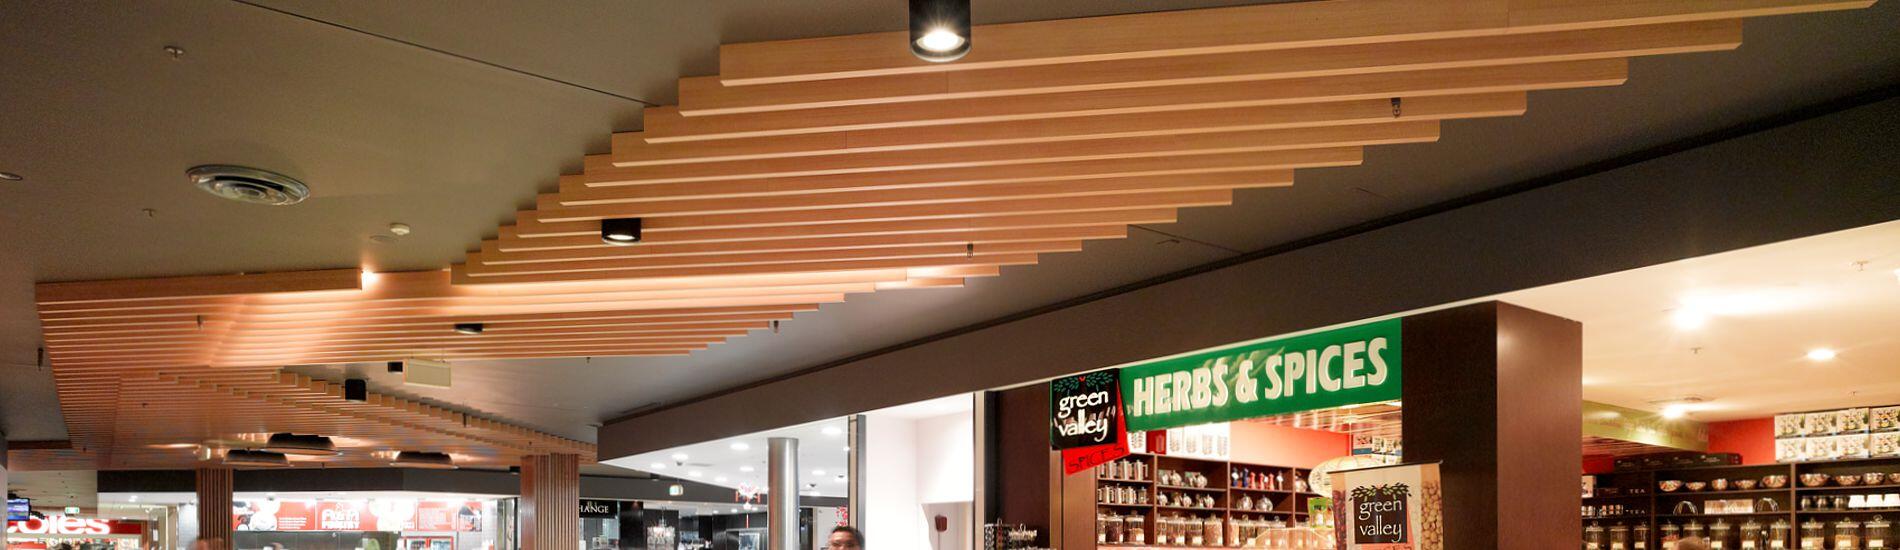 Lightweight MAXI BEAM for Ceiling Features Overcome Weight Issue and Logistics for Foodcourt Refubishment